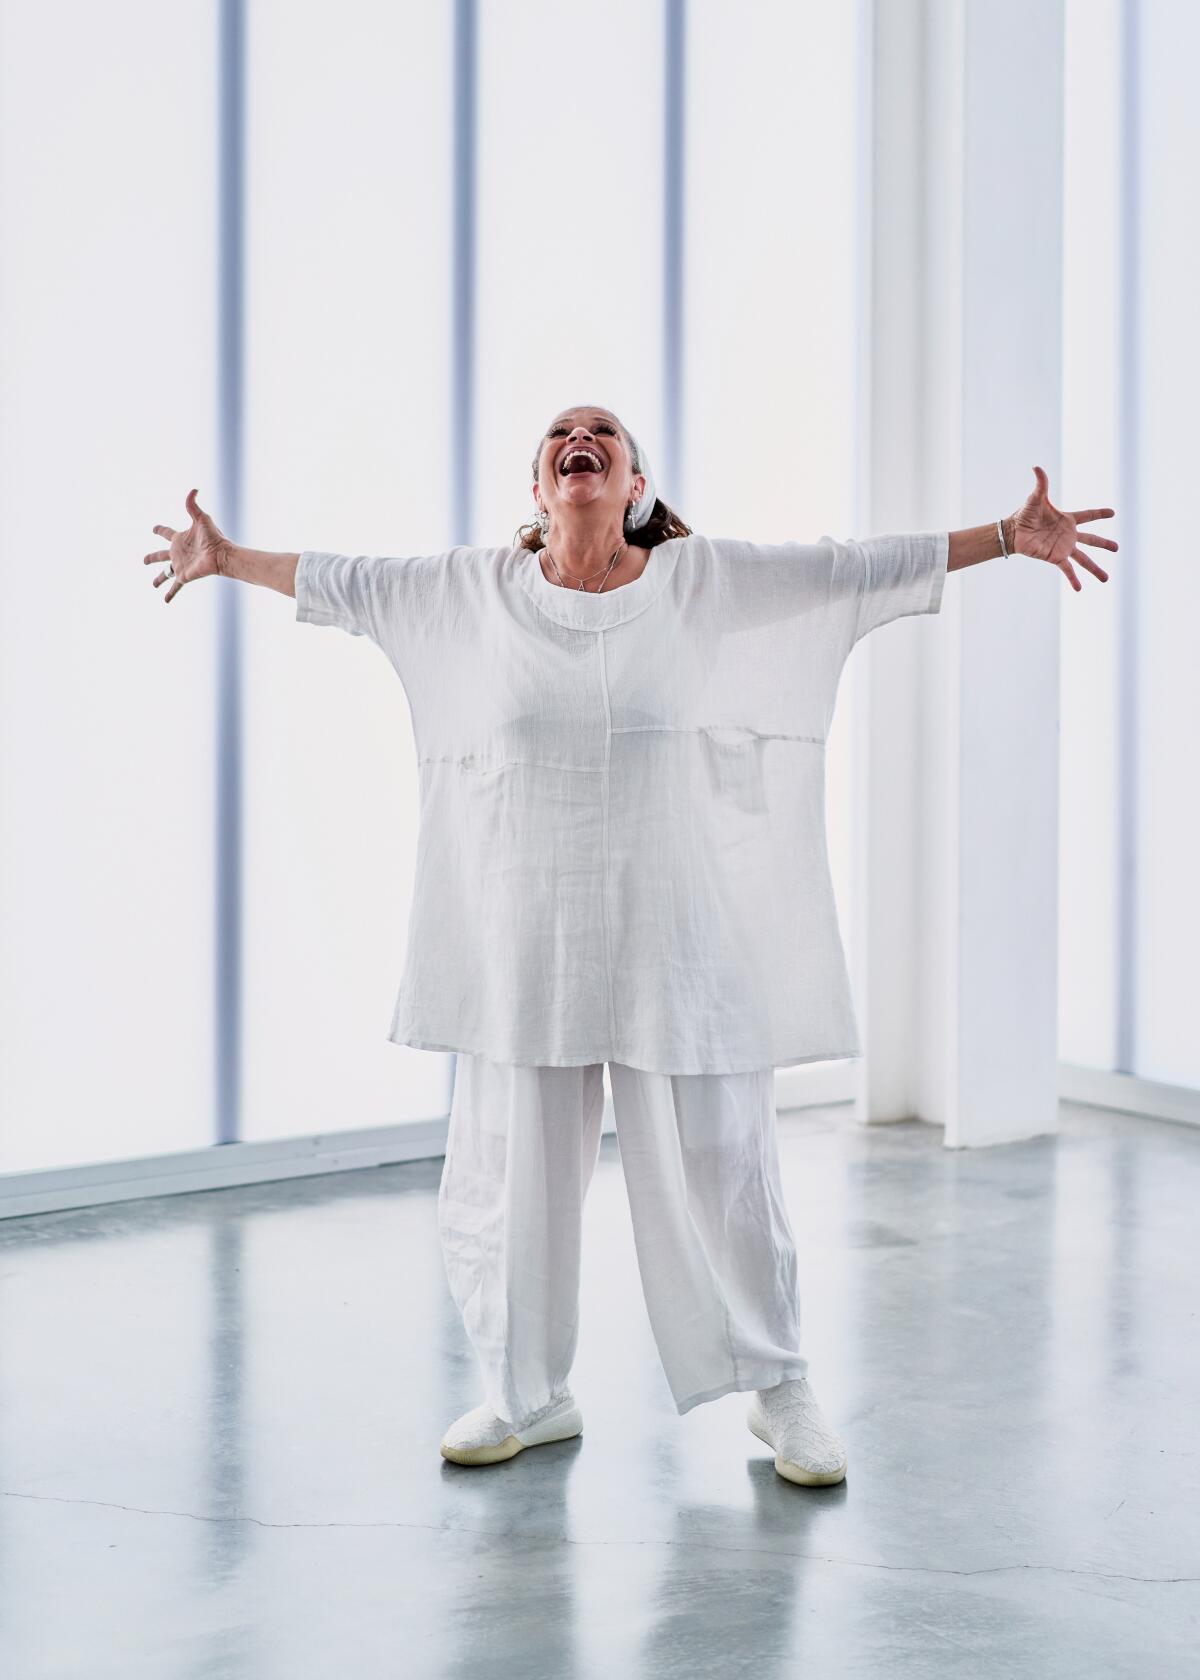 A woman wearing white reaches out her arms to her side in an expression of joy.